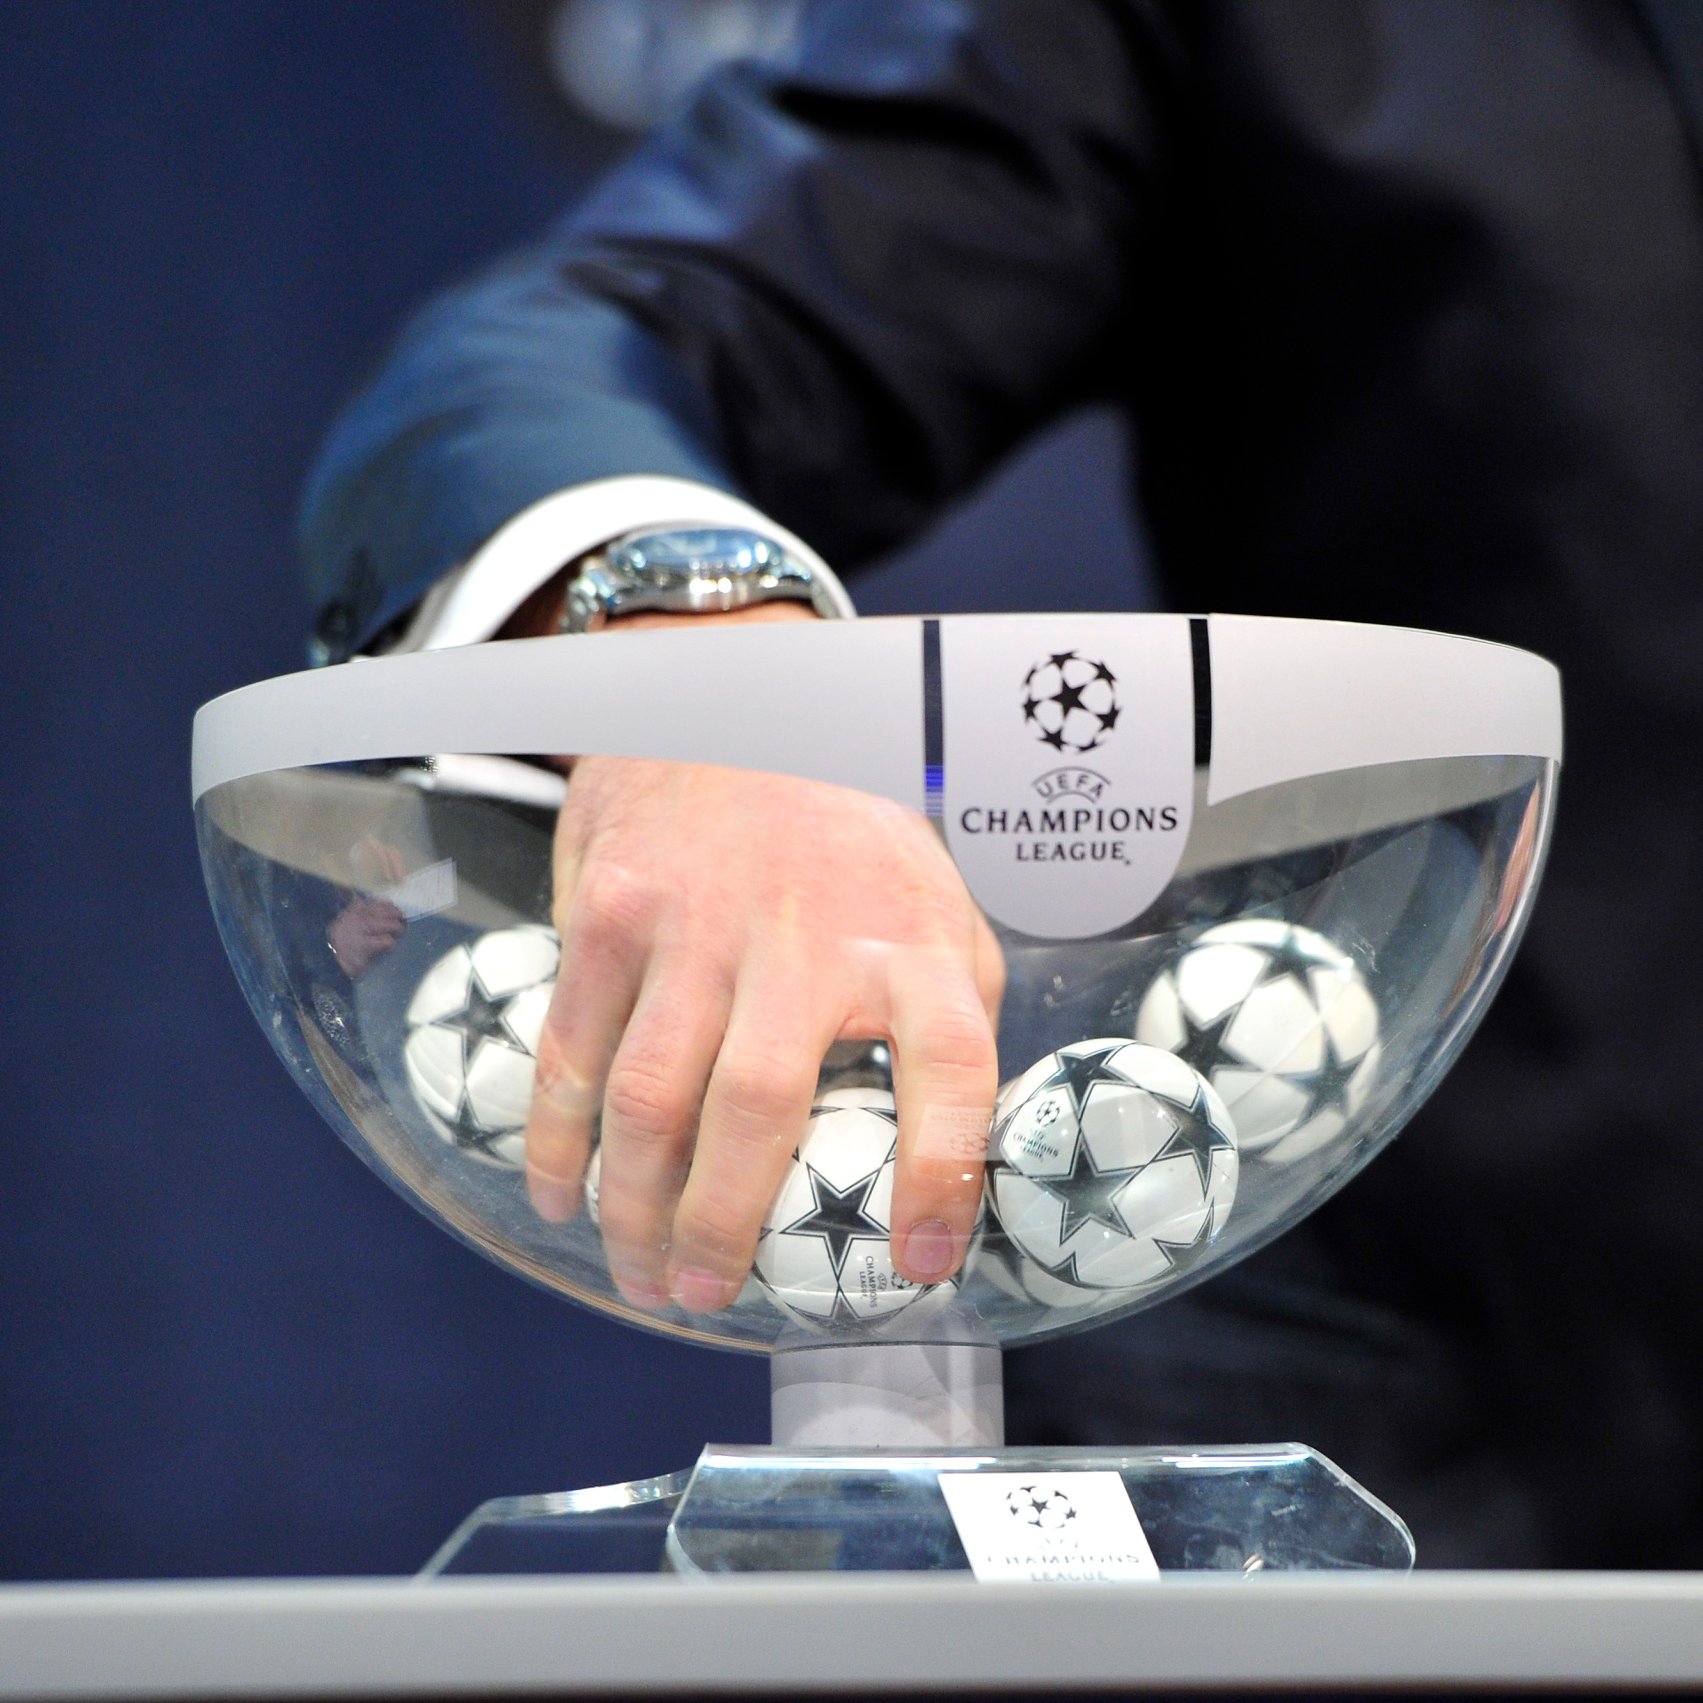 UEFA Champions League 21/22 draw as it happened: group stage